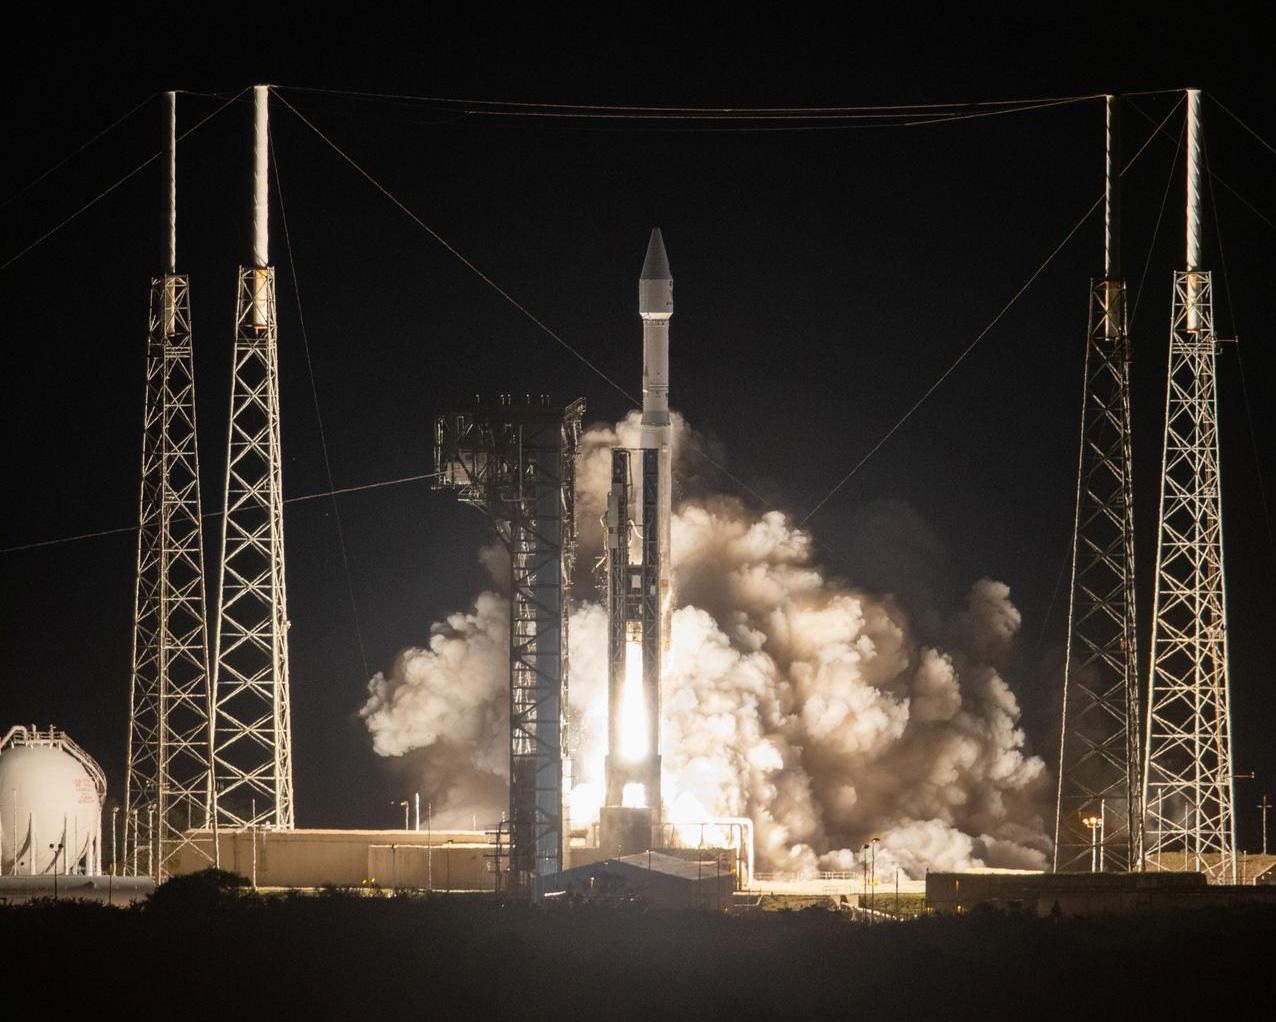 Solar Orbiter launch from Cape Canaveral on an Atlas V rocket on February 9th 2020